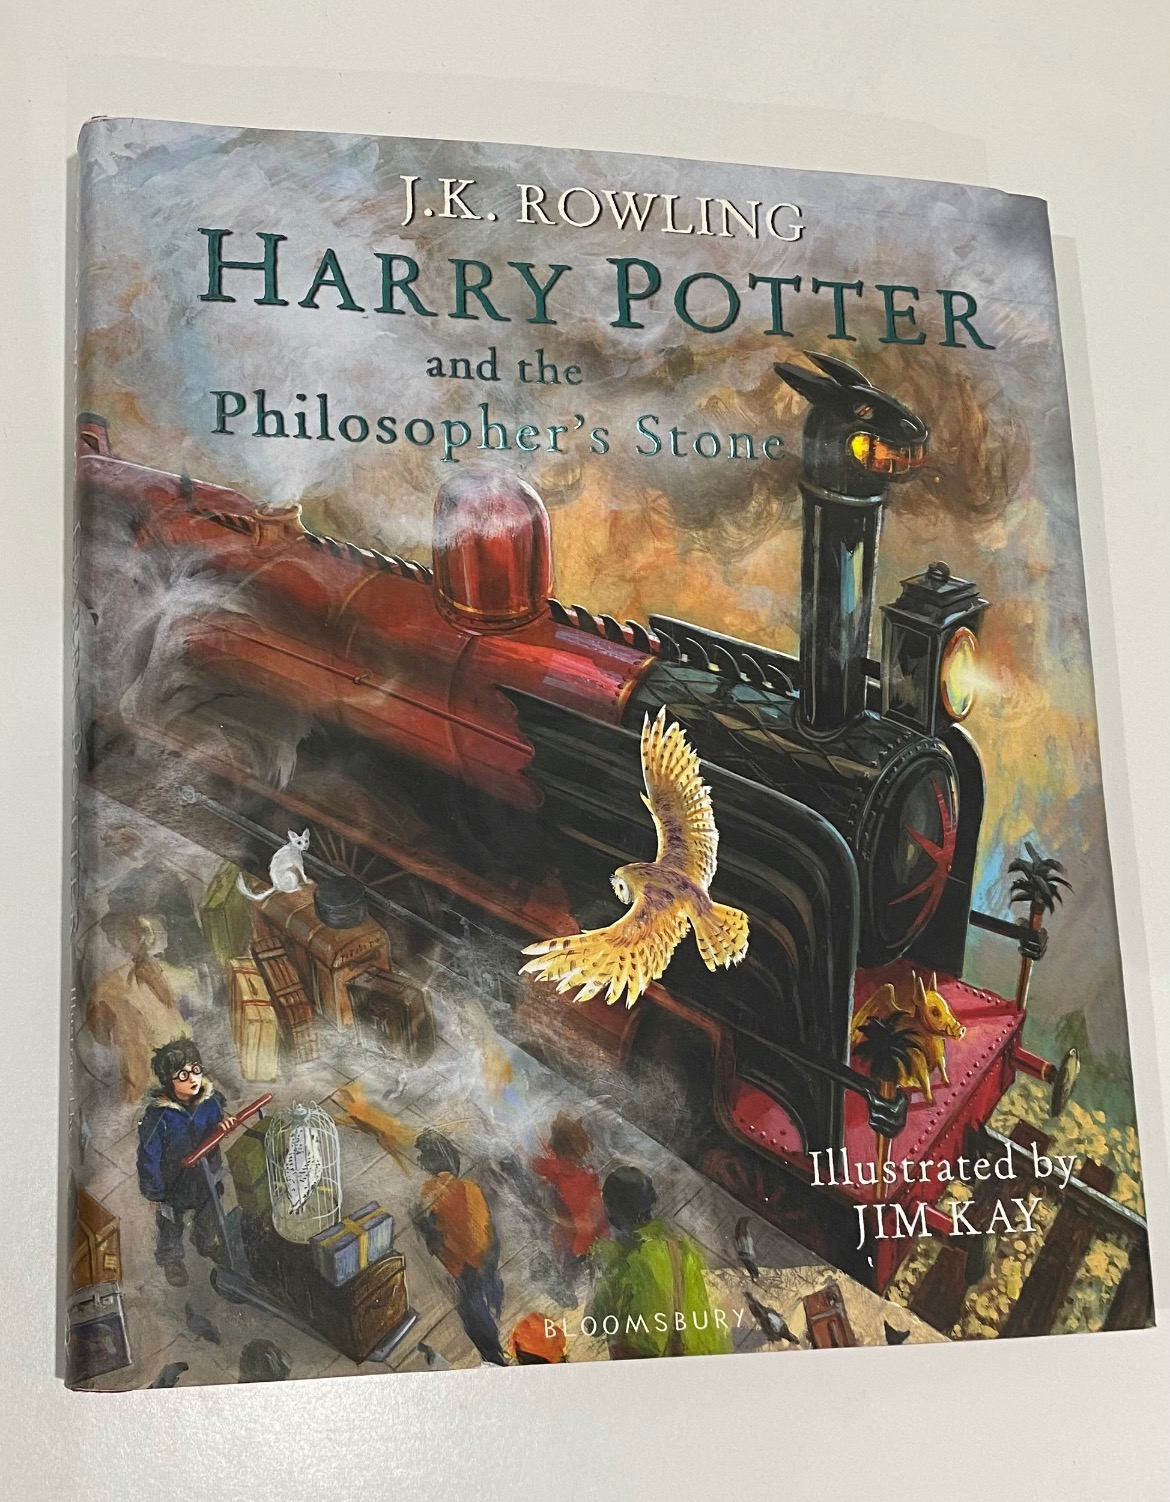 Harry Potter and the philosopher’s stone